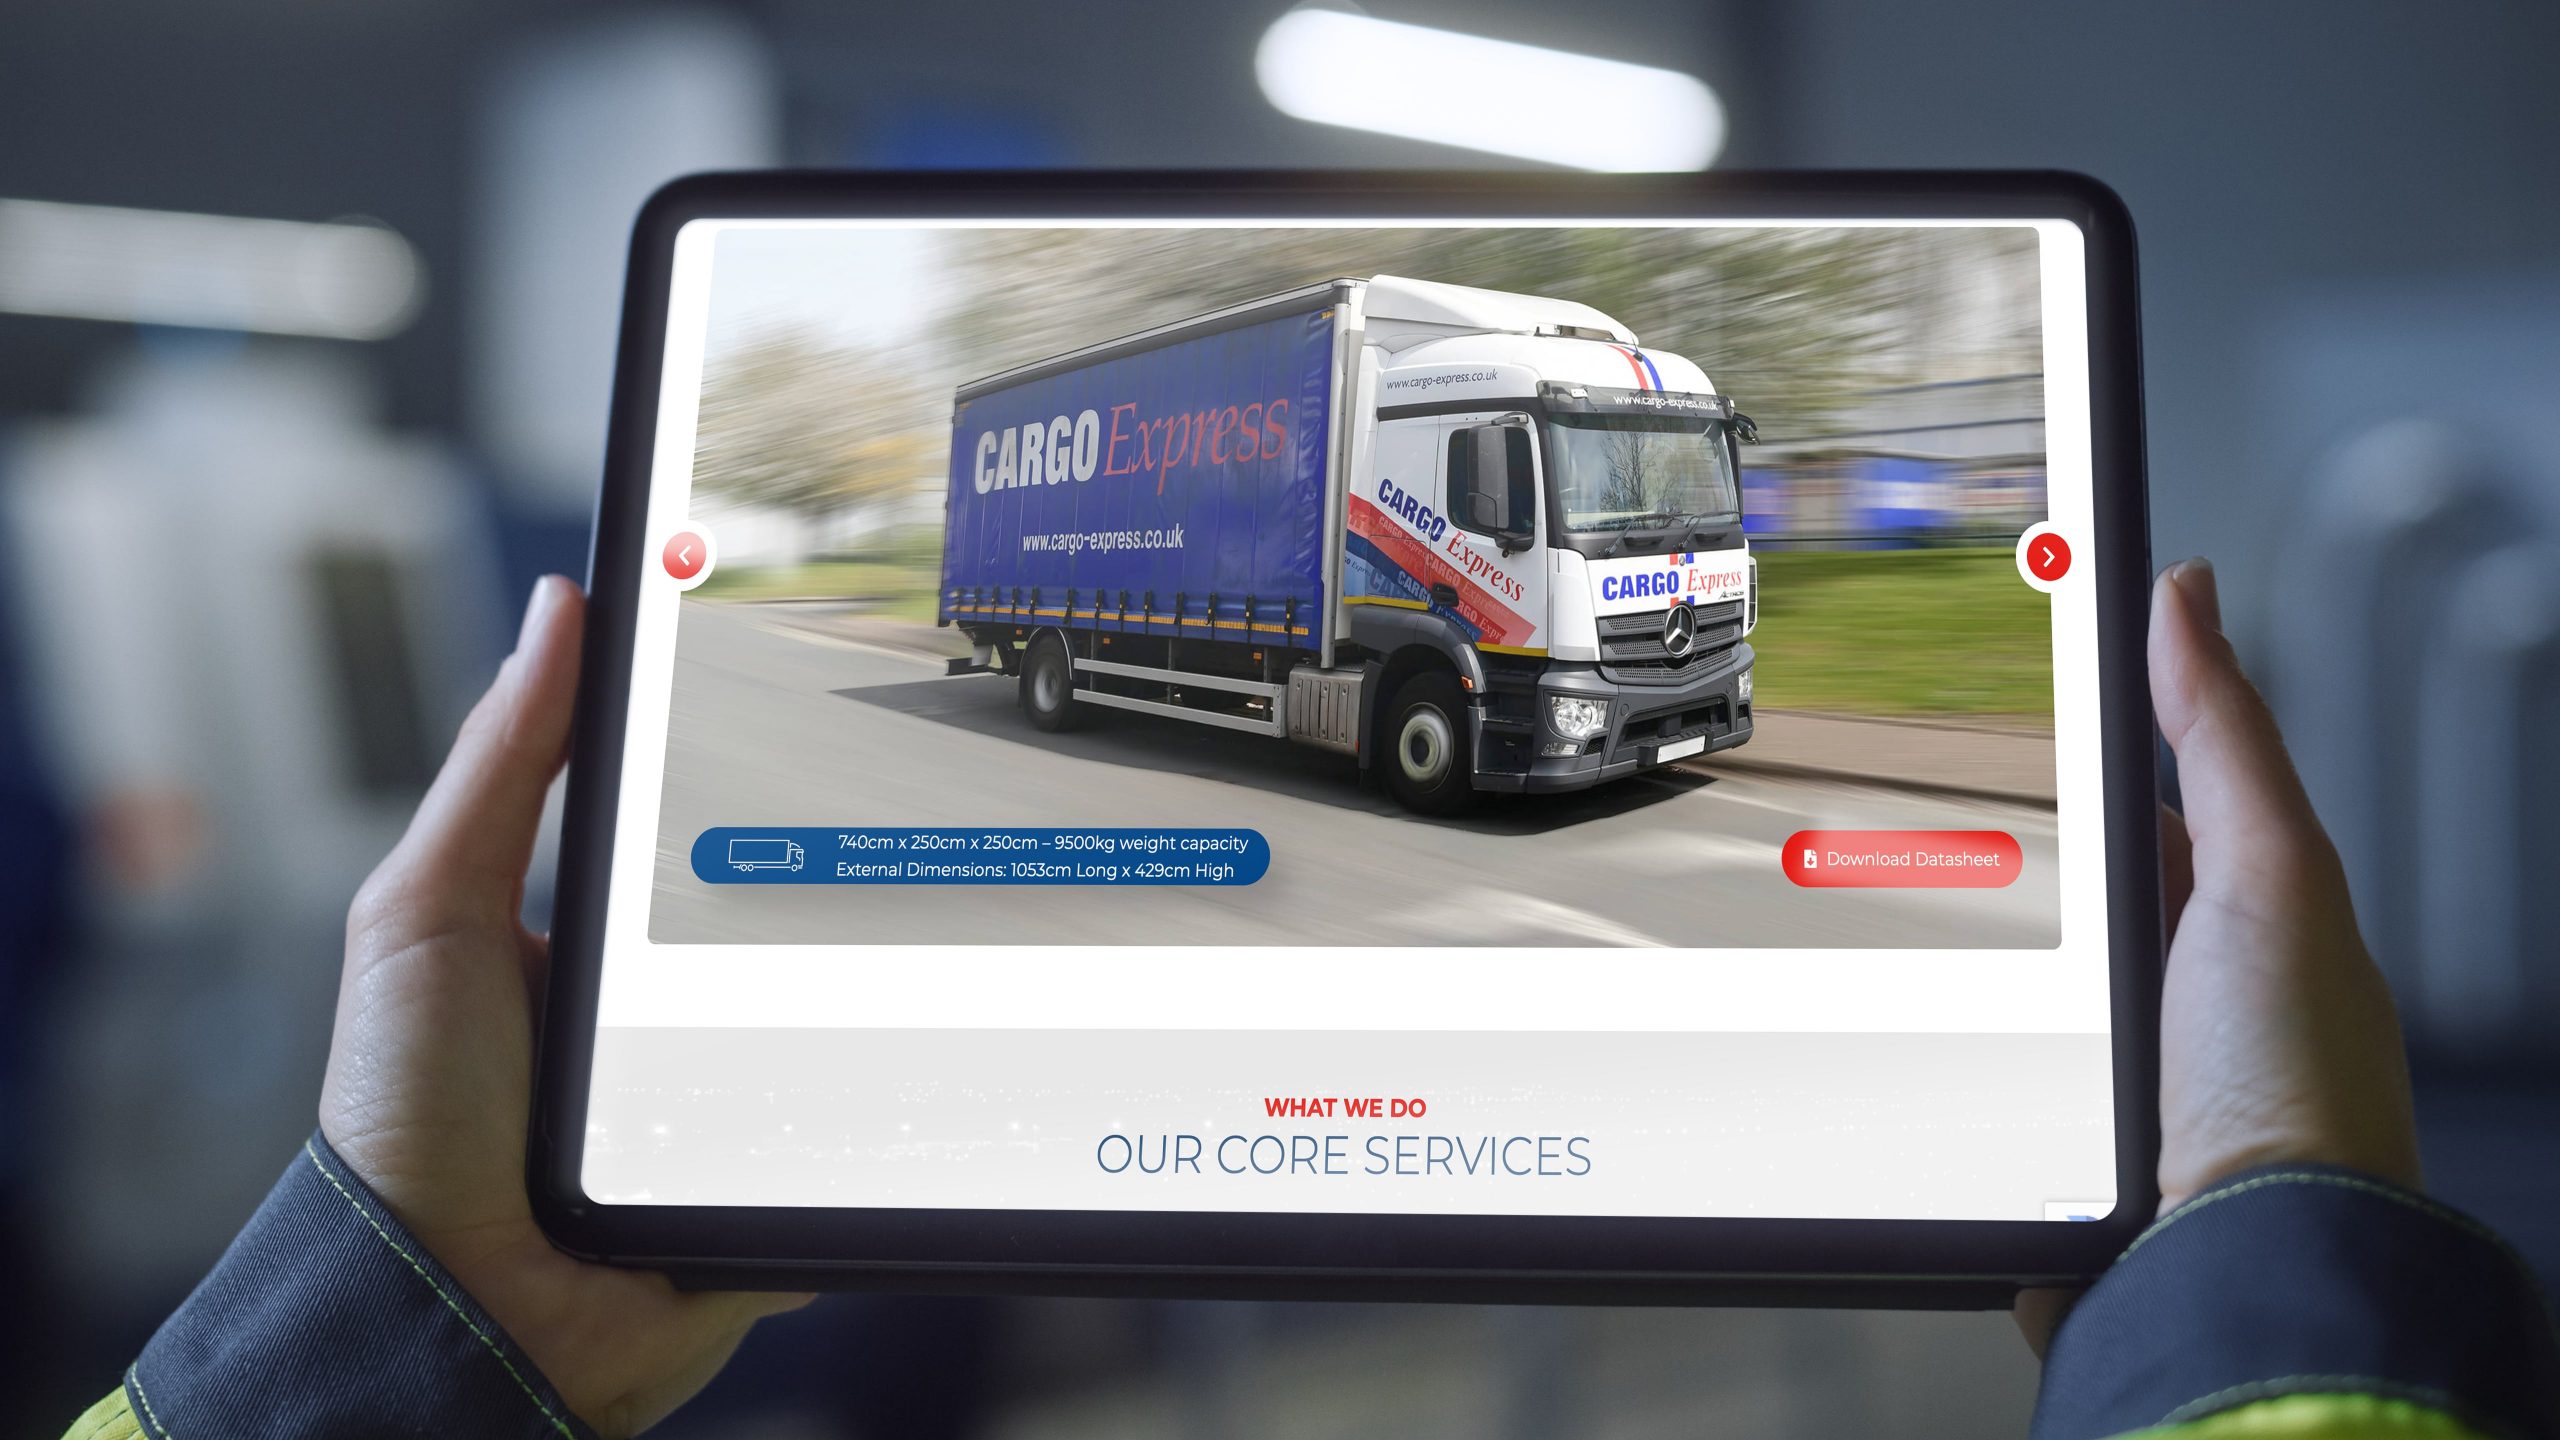 Cargo express website design shown on a persons tablet